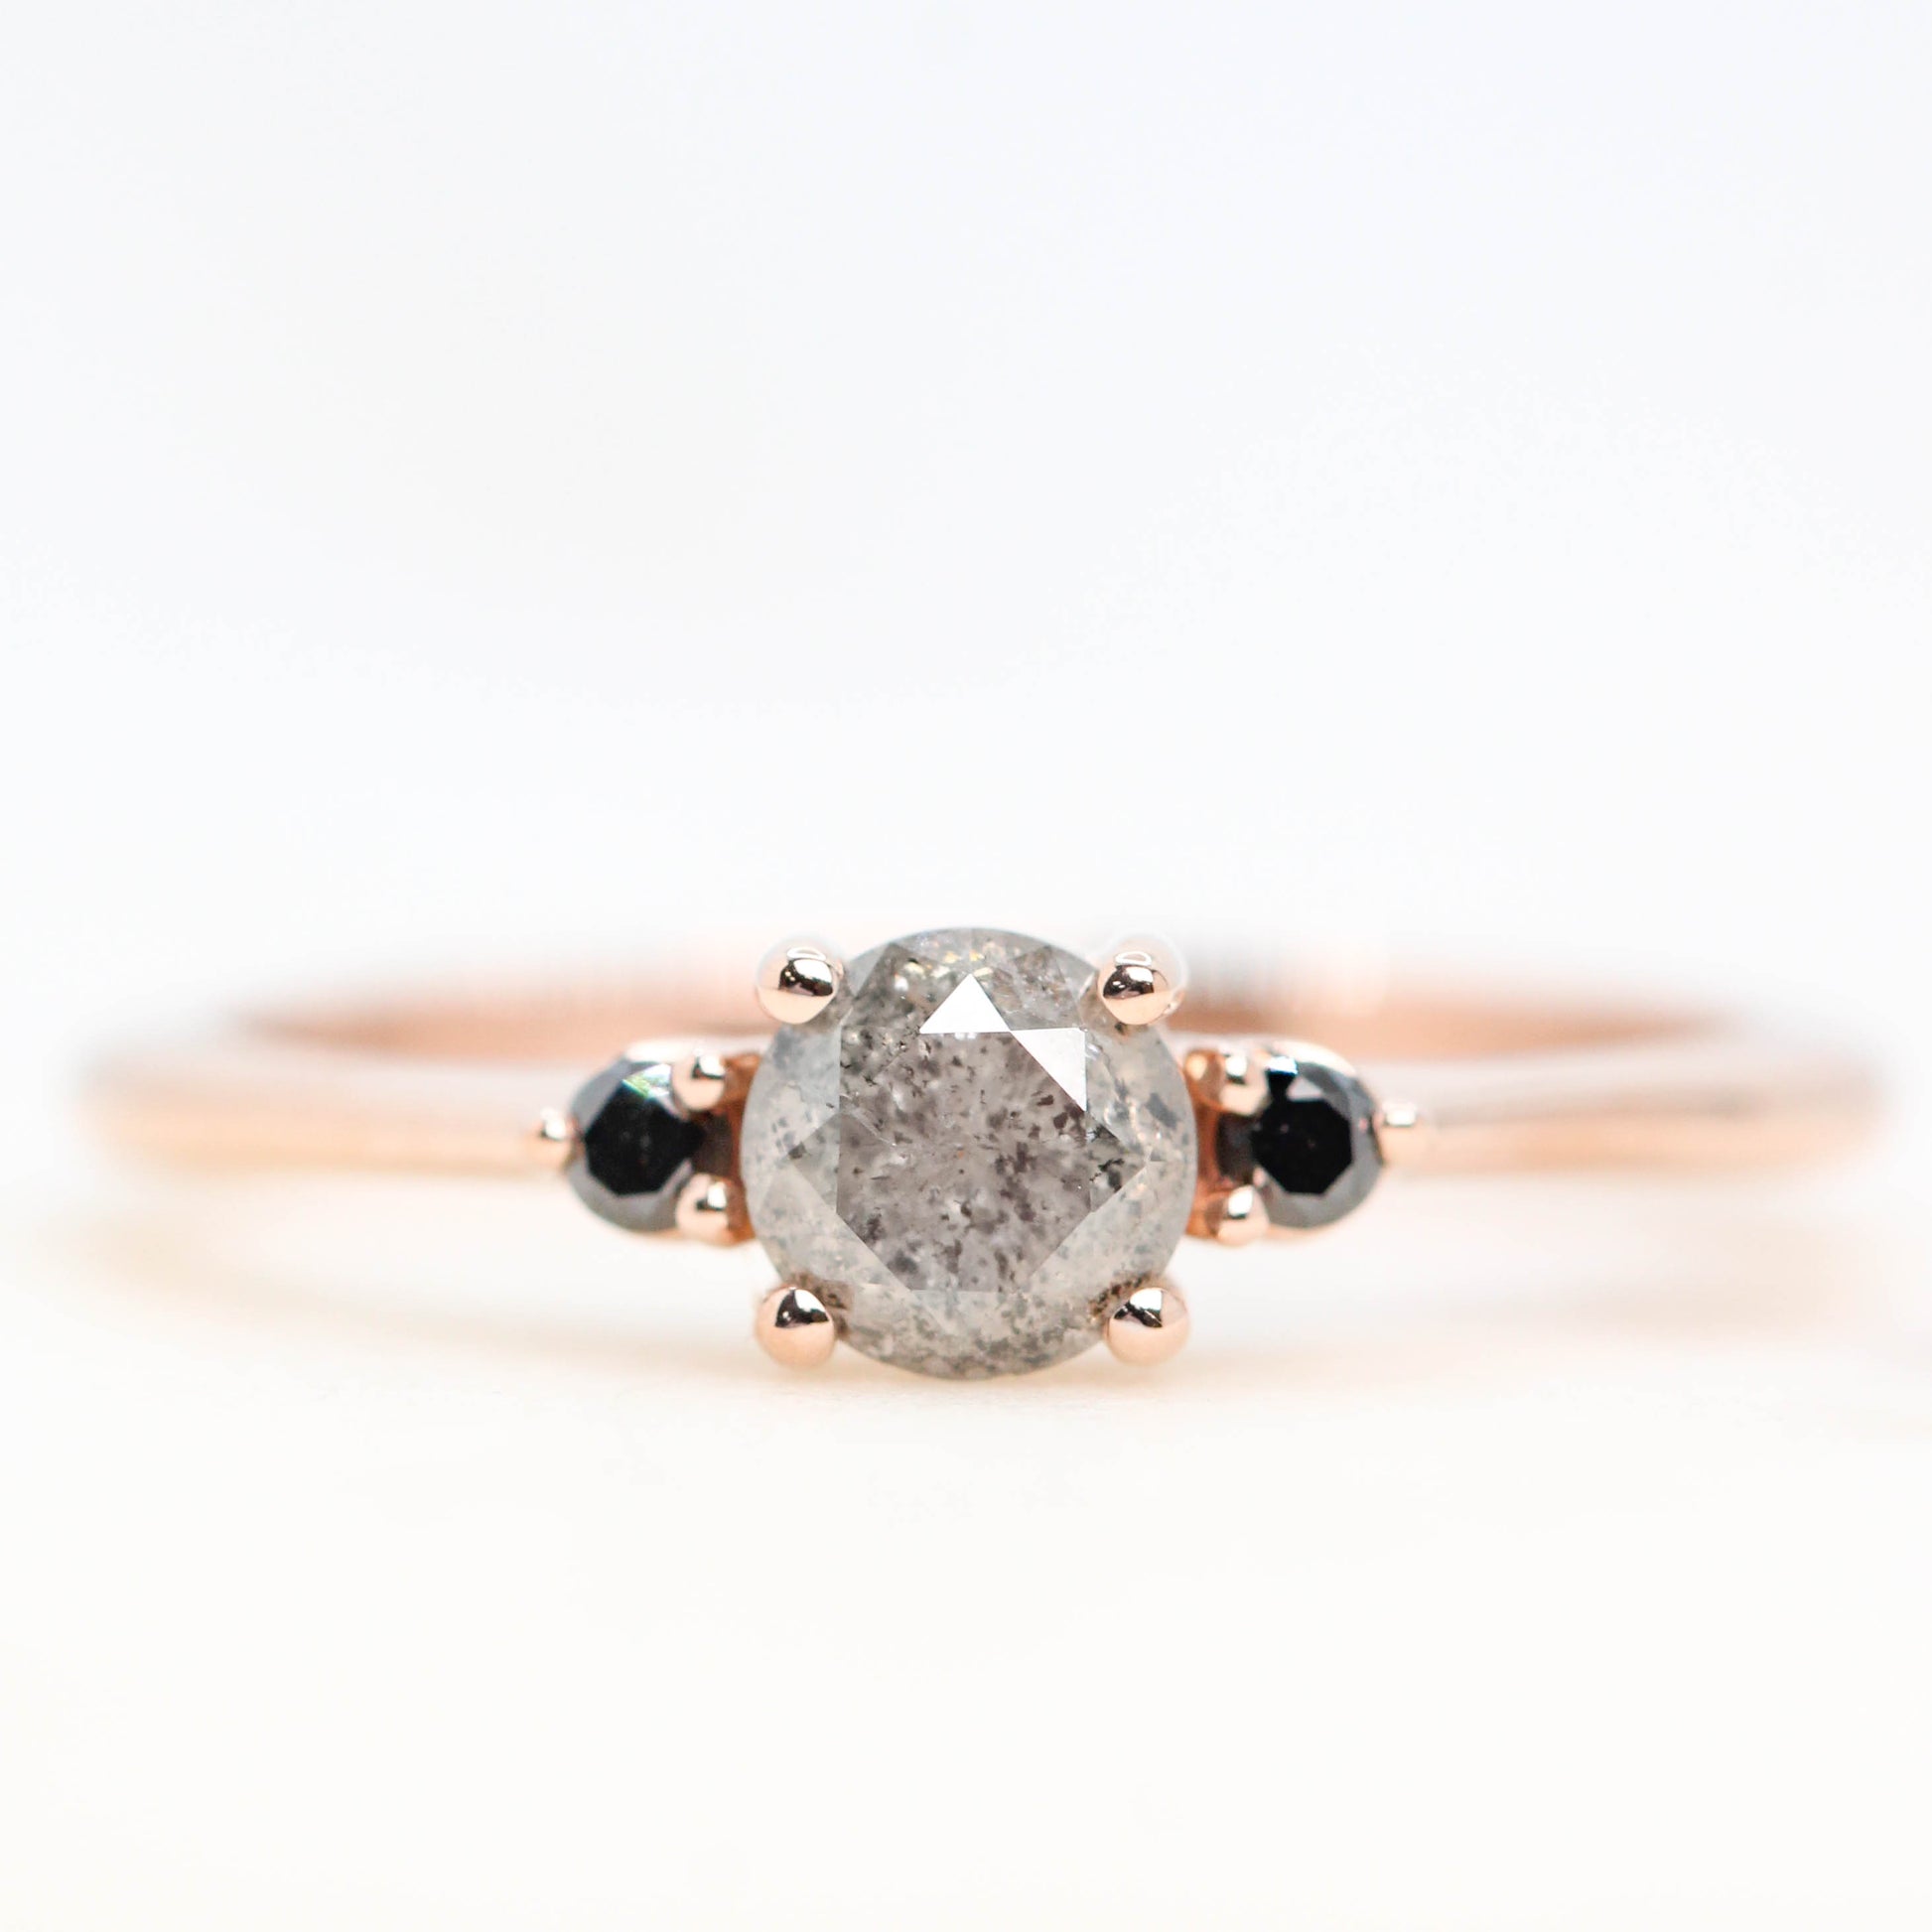 Drea Ring with a 0.55 Carat Gray Celestial Round Diamond and Black Accent Diamonds in 14k Rose Gold - Ready to Size and Ship - Midwinter Co. Alternative Bridal Rings and Modern Fine Jewelry